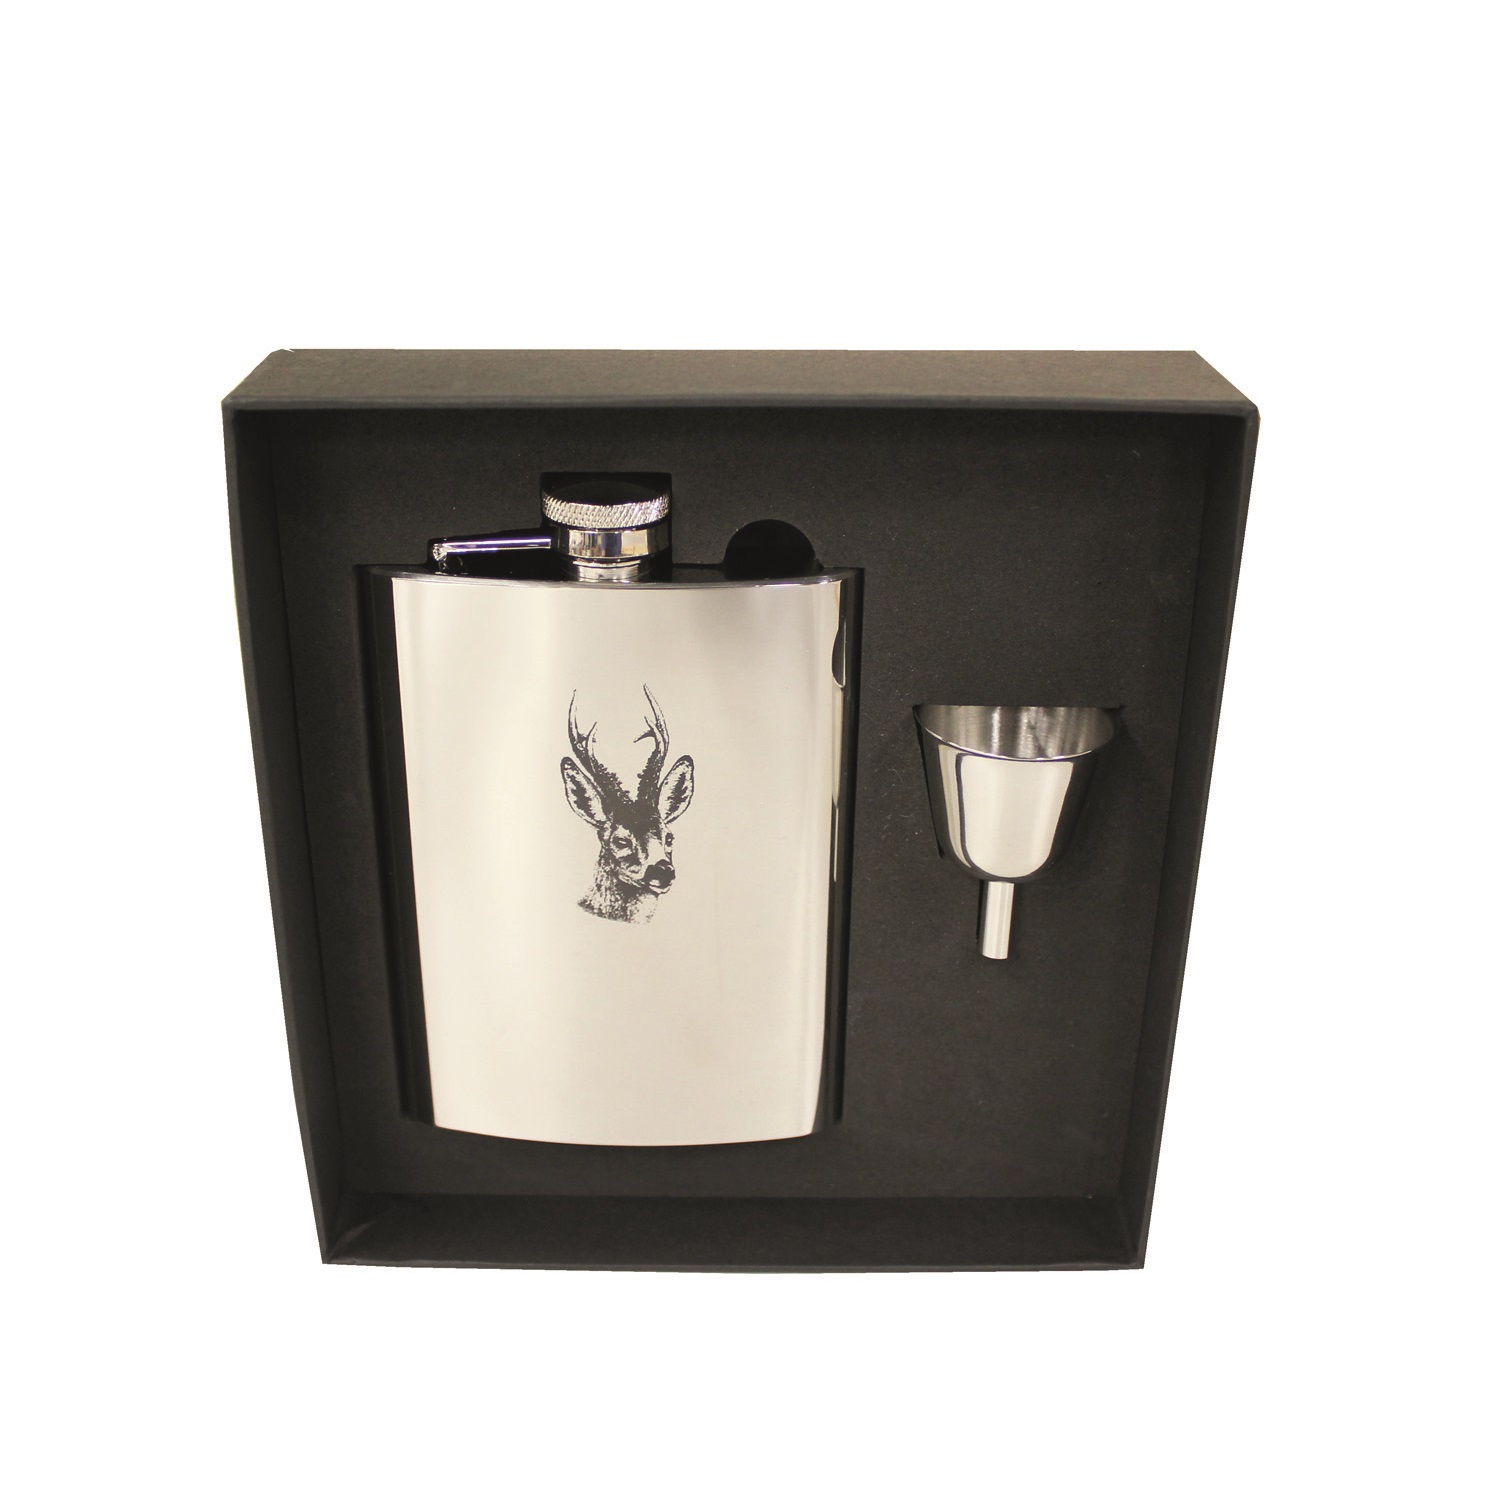 Stabilotherm Pocket Flask 0,2 L + Gift Box  Moose - Stainless Steel OneSize, Moose - Stainless Steel